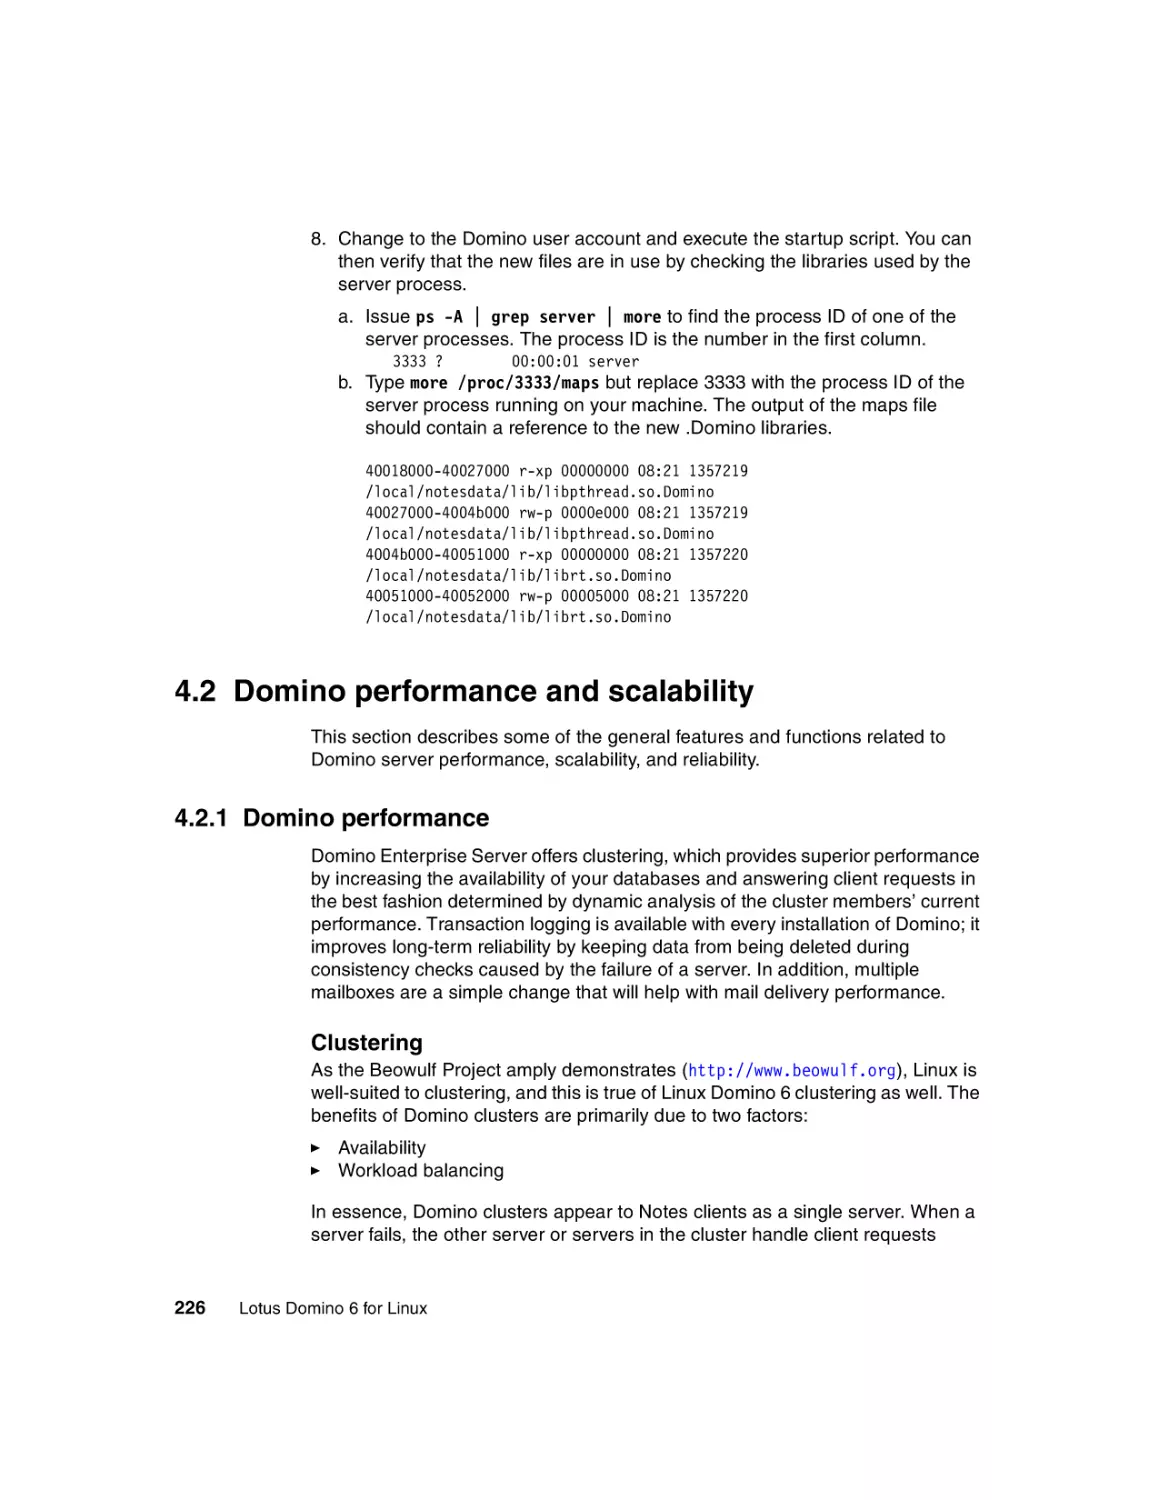 4.2 Domino performance and scalability
4.2.1 Domino performance